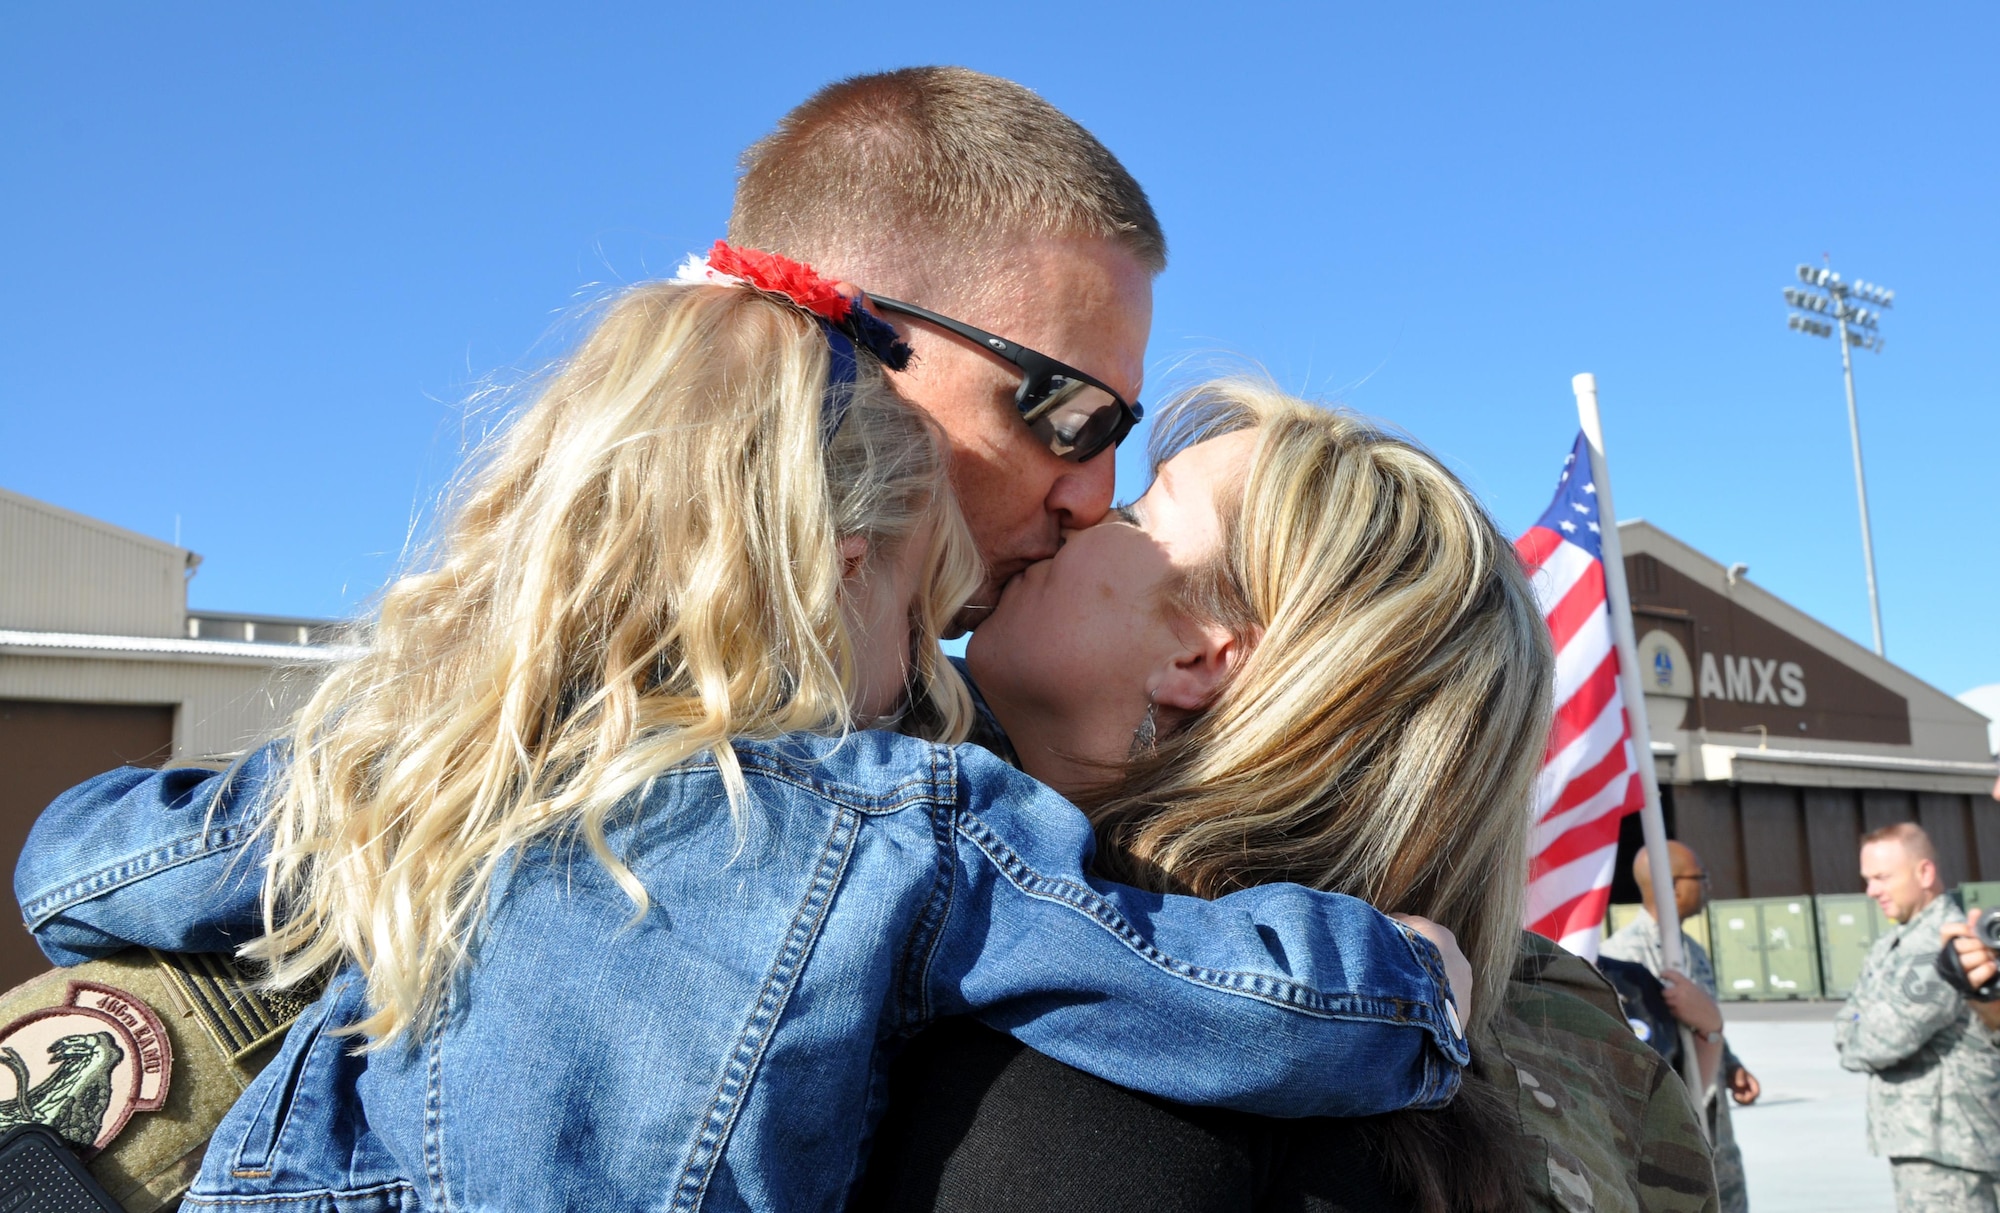 Tech. Sgt. Cliff Calhoun, a reservist in the 419th Aircraft Maintenance Squadron, embraces his wife and daughter upon returning from deployment to Afghanistan. About 300 Airmen from the active duty 388th Fighter Wing and Reserve 419th Fighter Wing returned to Hill Air Force Base on May 10. While deployed, the Airmen supported F-16 operations in the region as part of Operation Freedom’s Sentinel and NATO’s Resolute Support Mission. Most of the Airmen were deployed for six months. (U.S. Air Force photo/Bryan Magaña) 